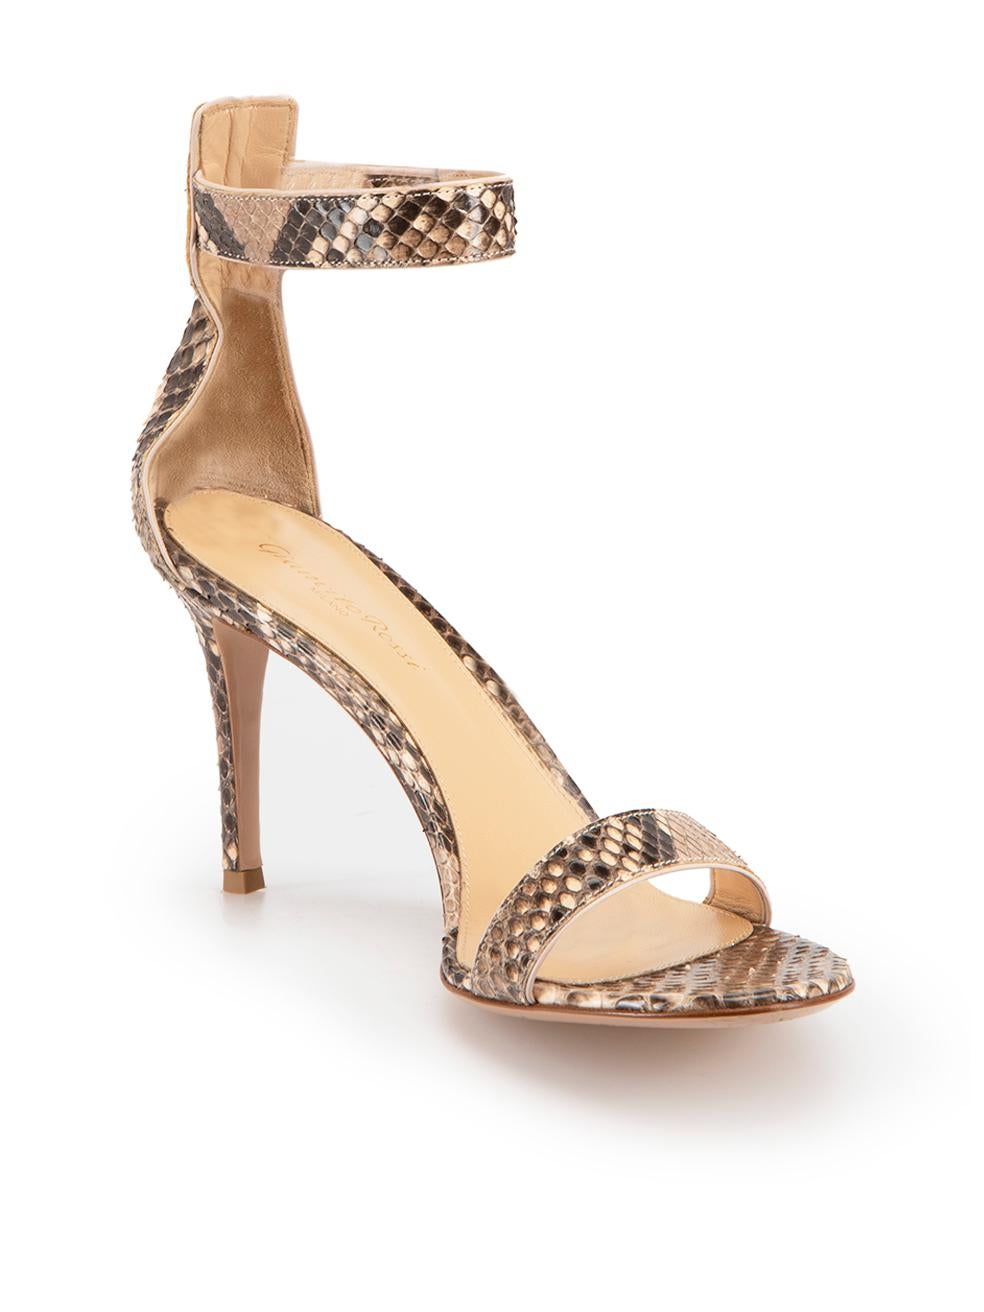 CONDITION is Very good. Minimal wear to sandals is evident. Minimal scuffing seen on sole with minor creasing of upper on this used Gianvito Rossi designer resale item. Comes with dust bag.



Details


Brown

Snakeskin

Heeled sandals

Mid